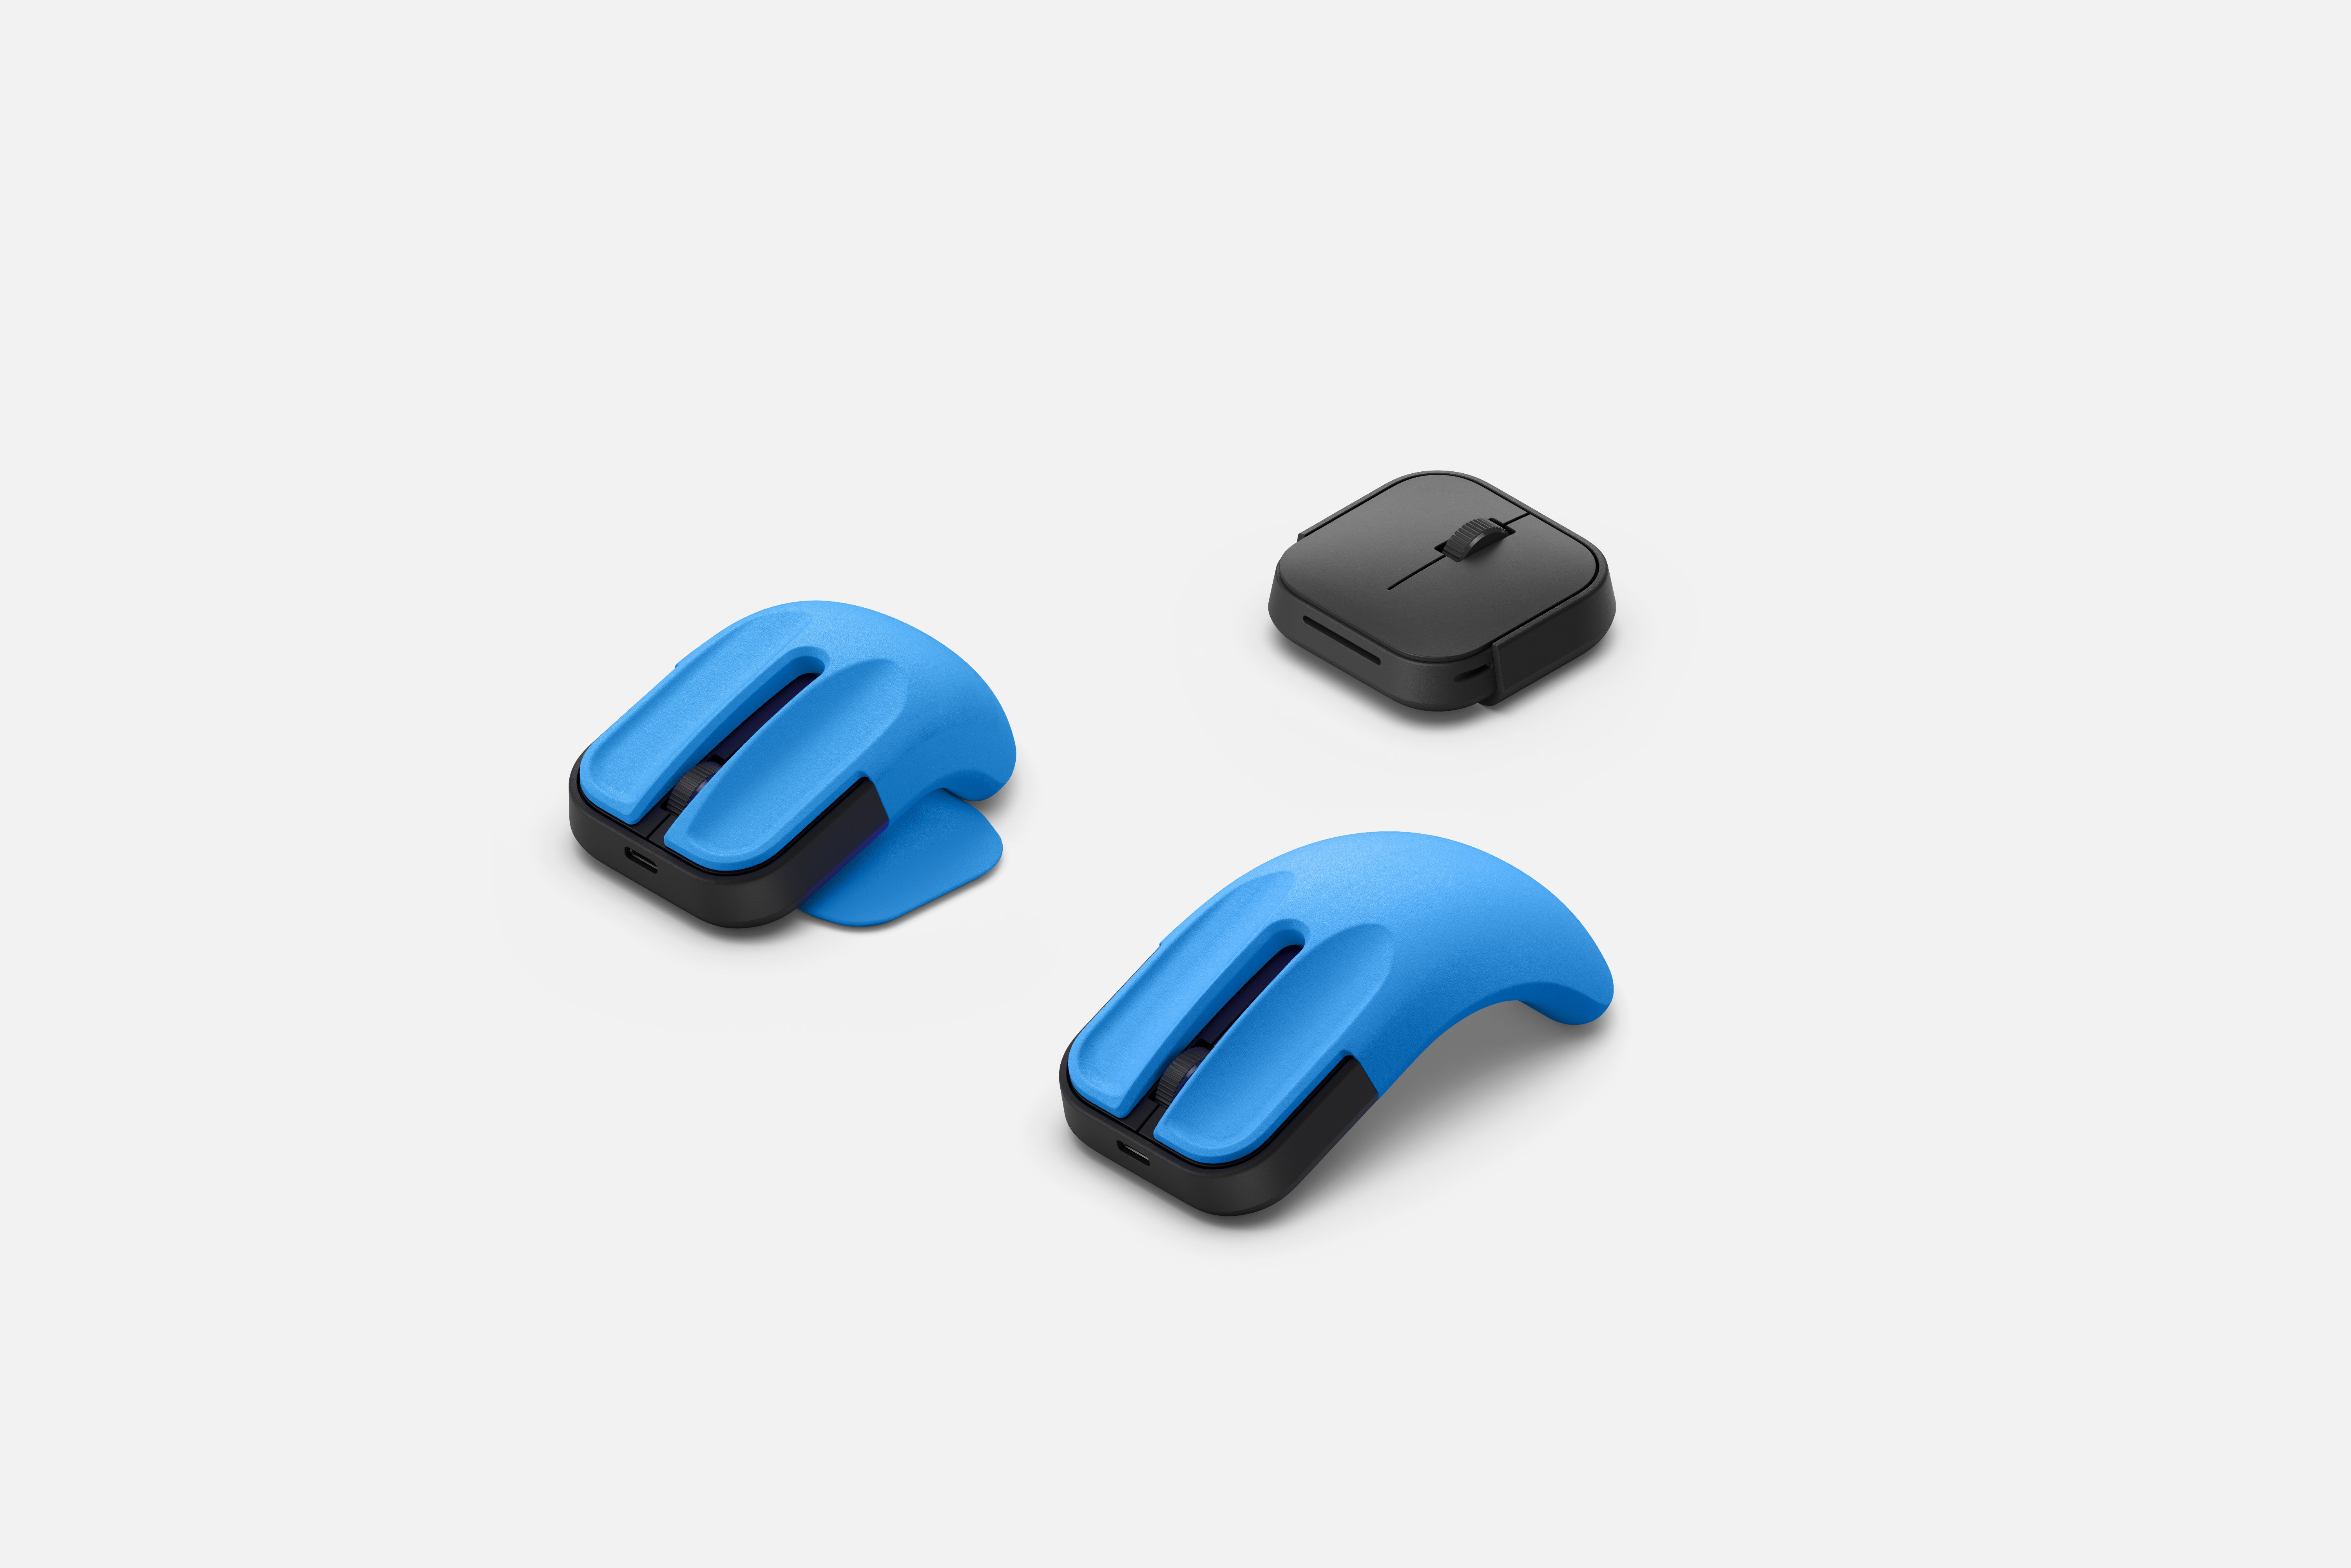 Microsoft adaptive mouse with two blue 3D printed mouse tails